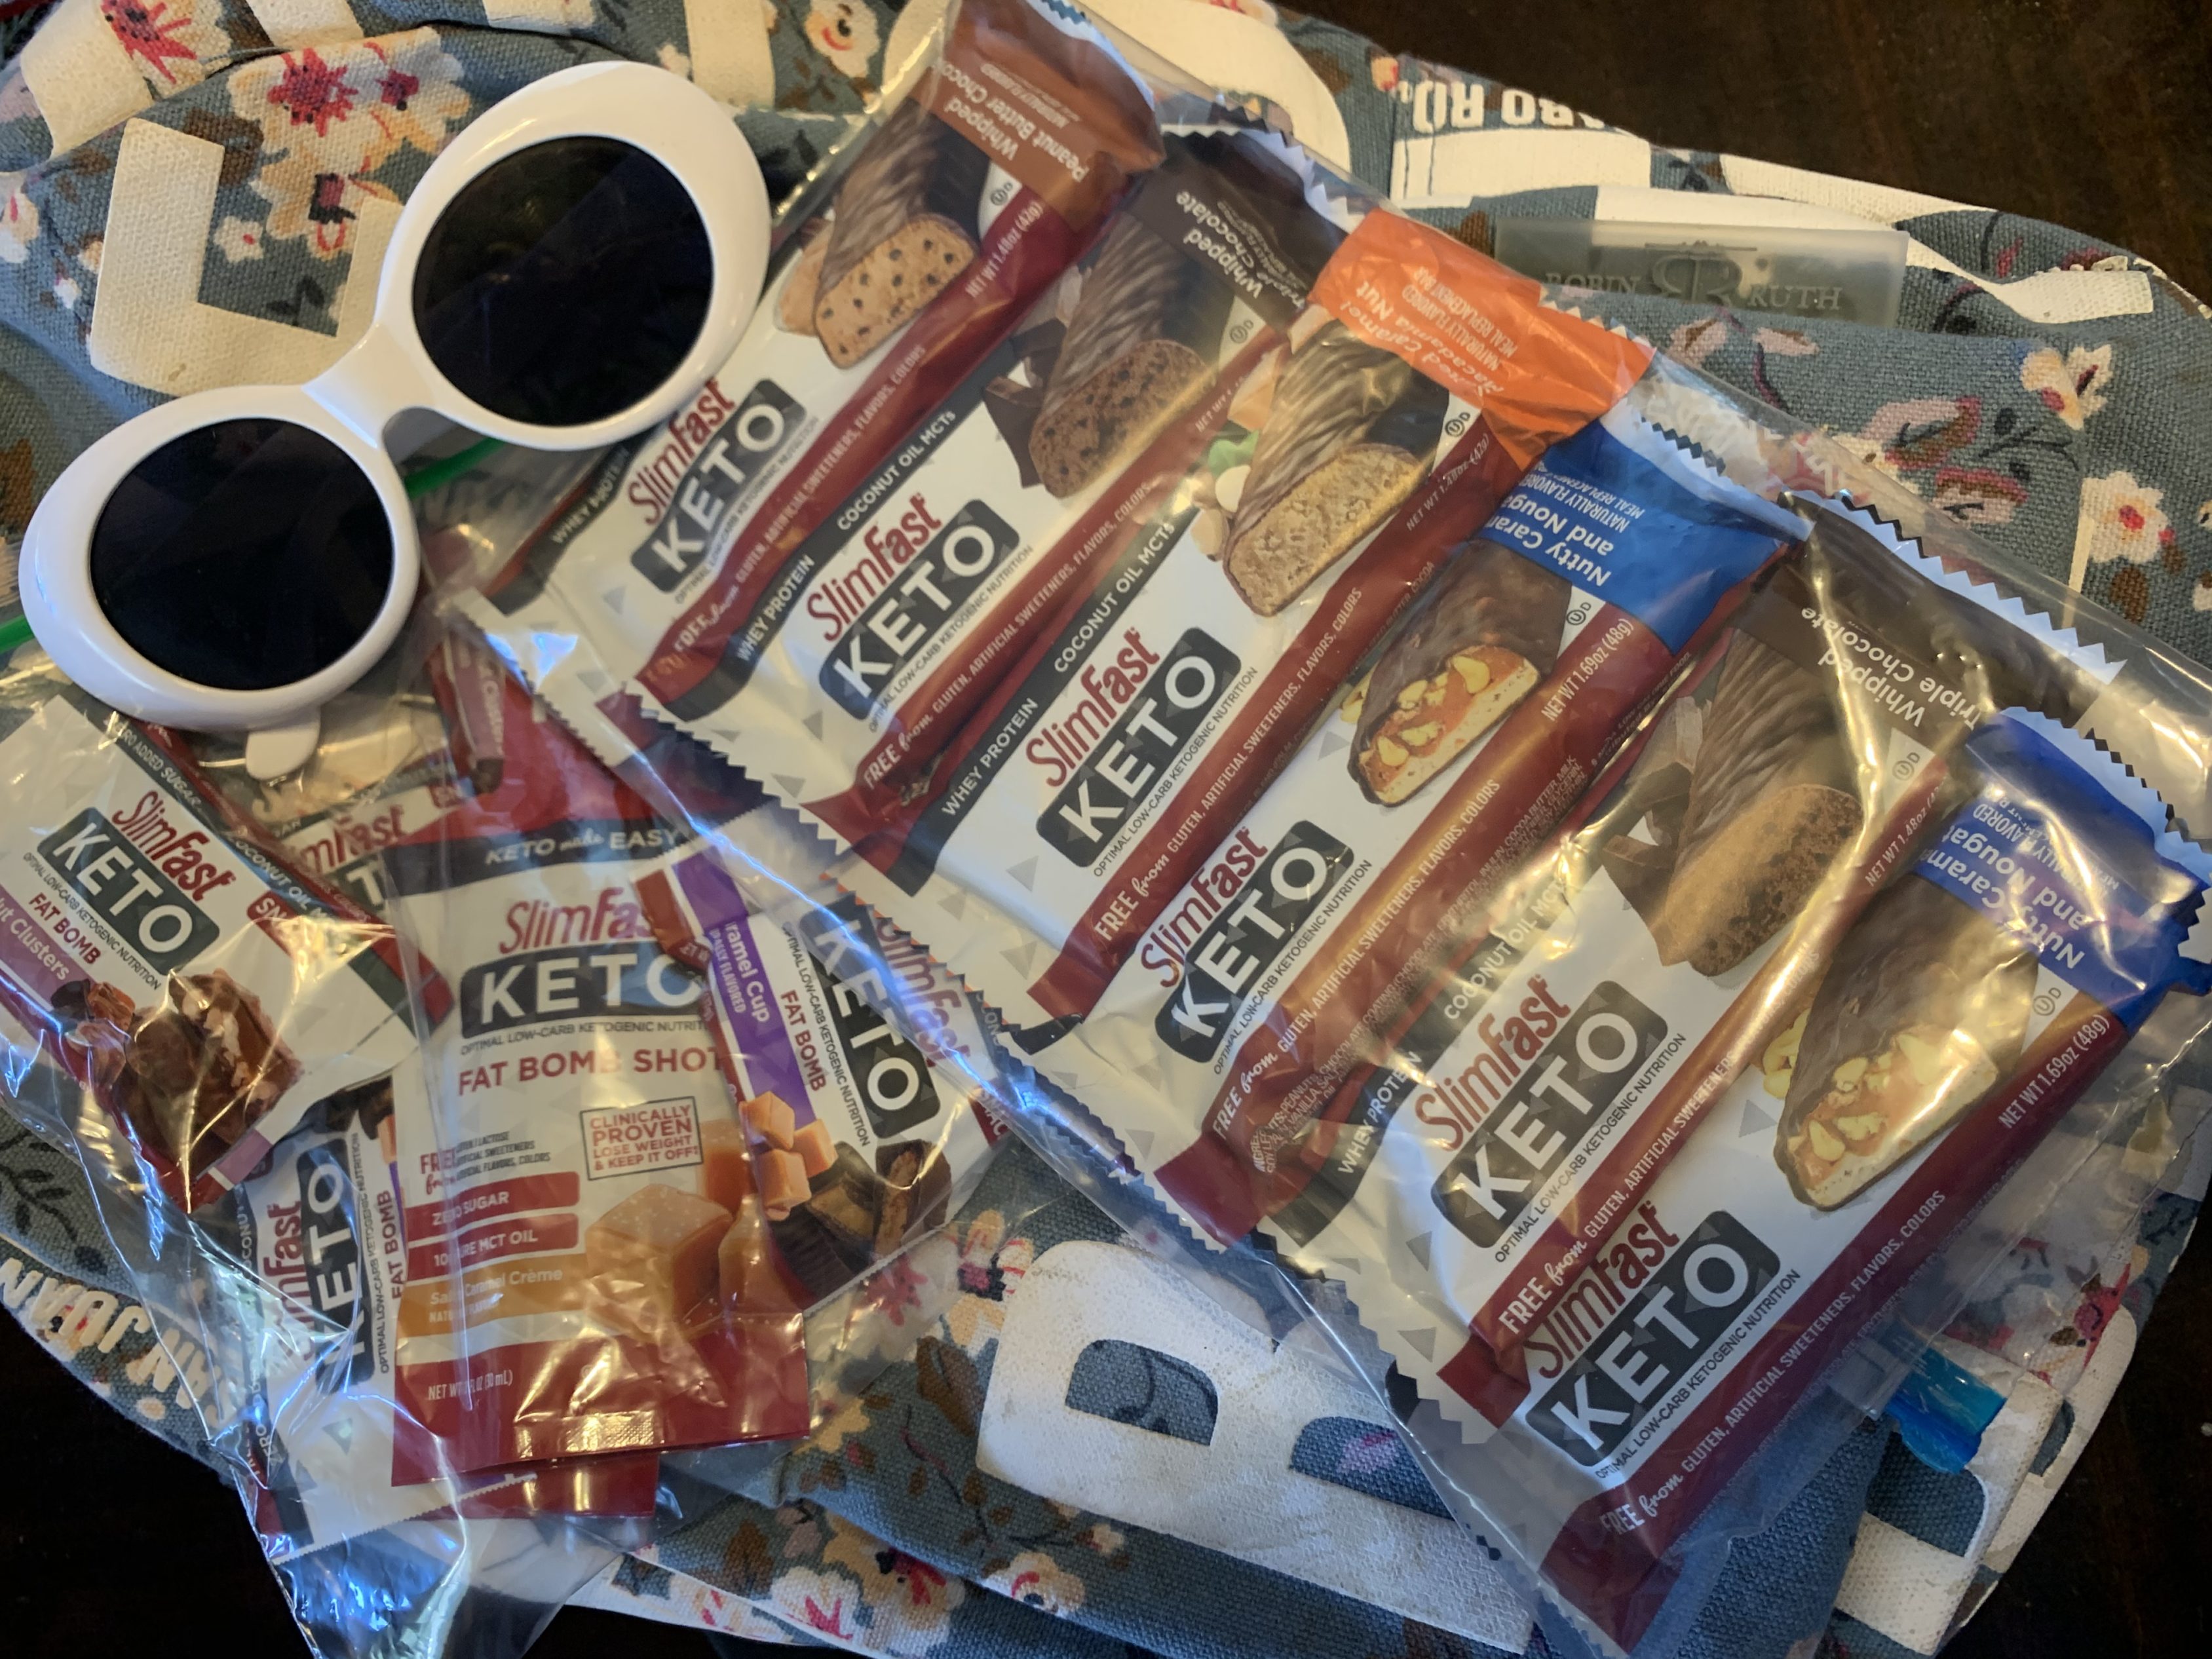 Bags full of SlimFast Keto products